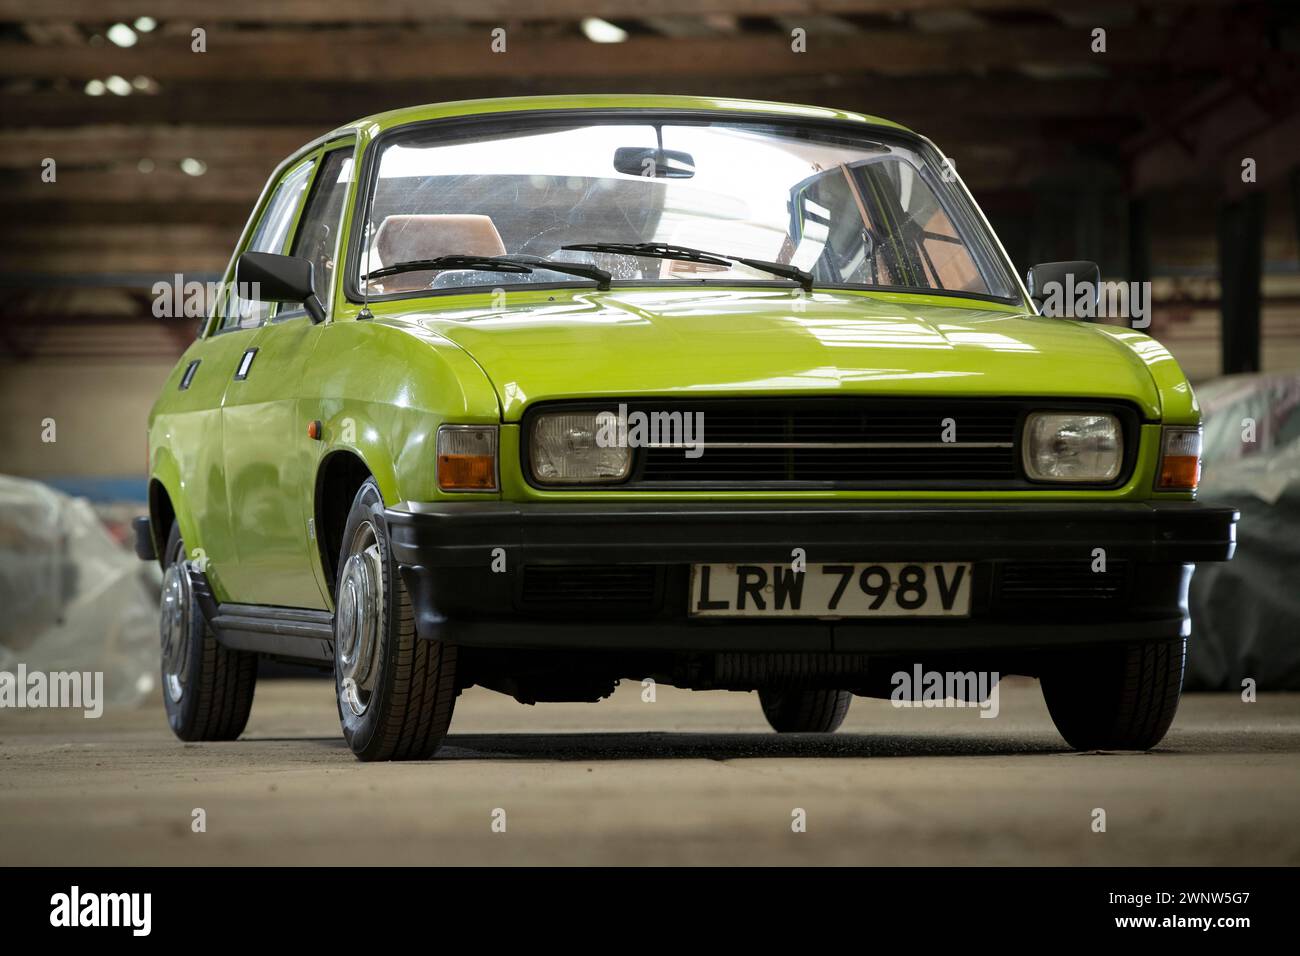 21/04/21  1980 Austin Allegro.  A collection of 130 British cars, in almost as many paint shades, was unveiled at Great British Car Journey, Ambergate Stock Photo